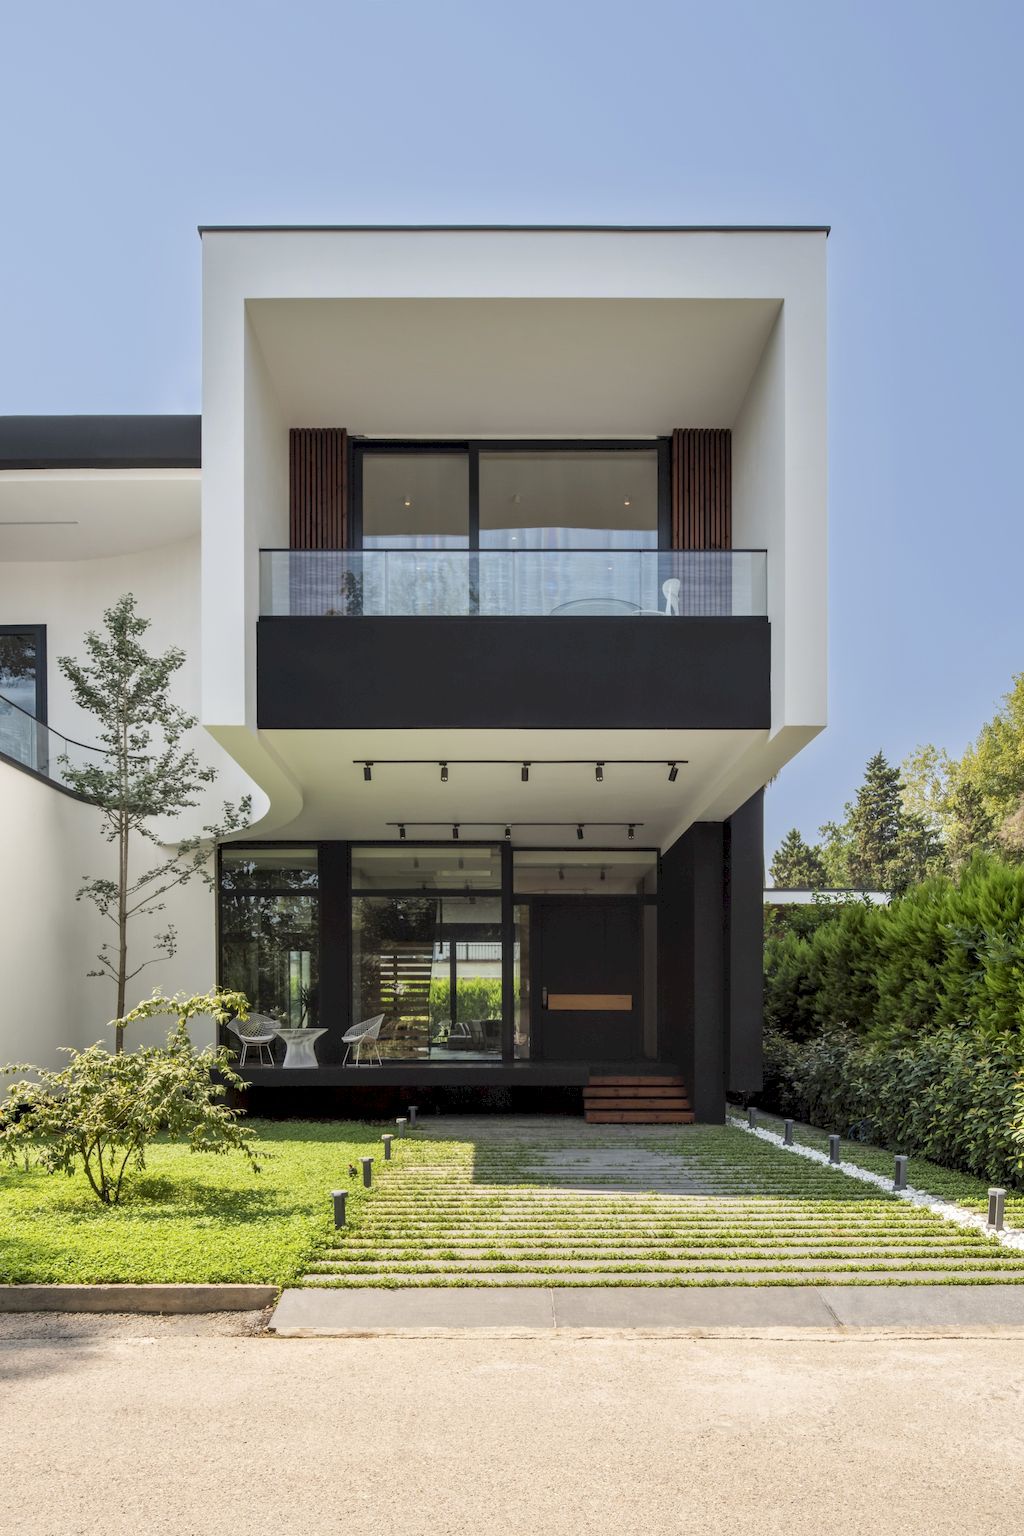 Ferdows House, a Stunning Home by Naghshekhak Architectural Group